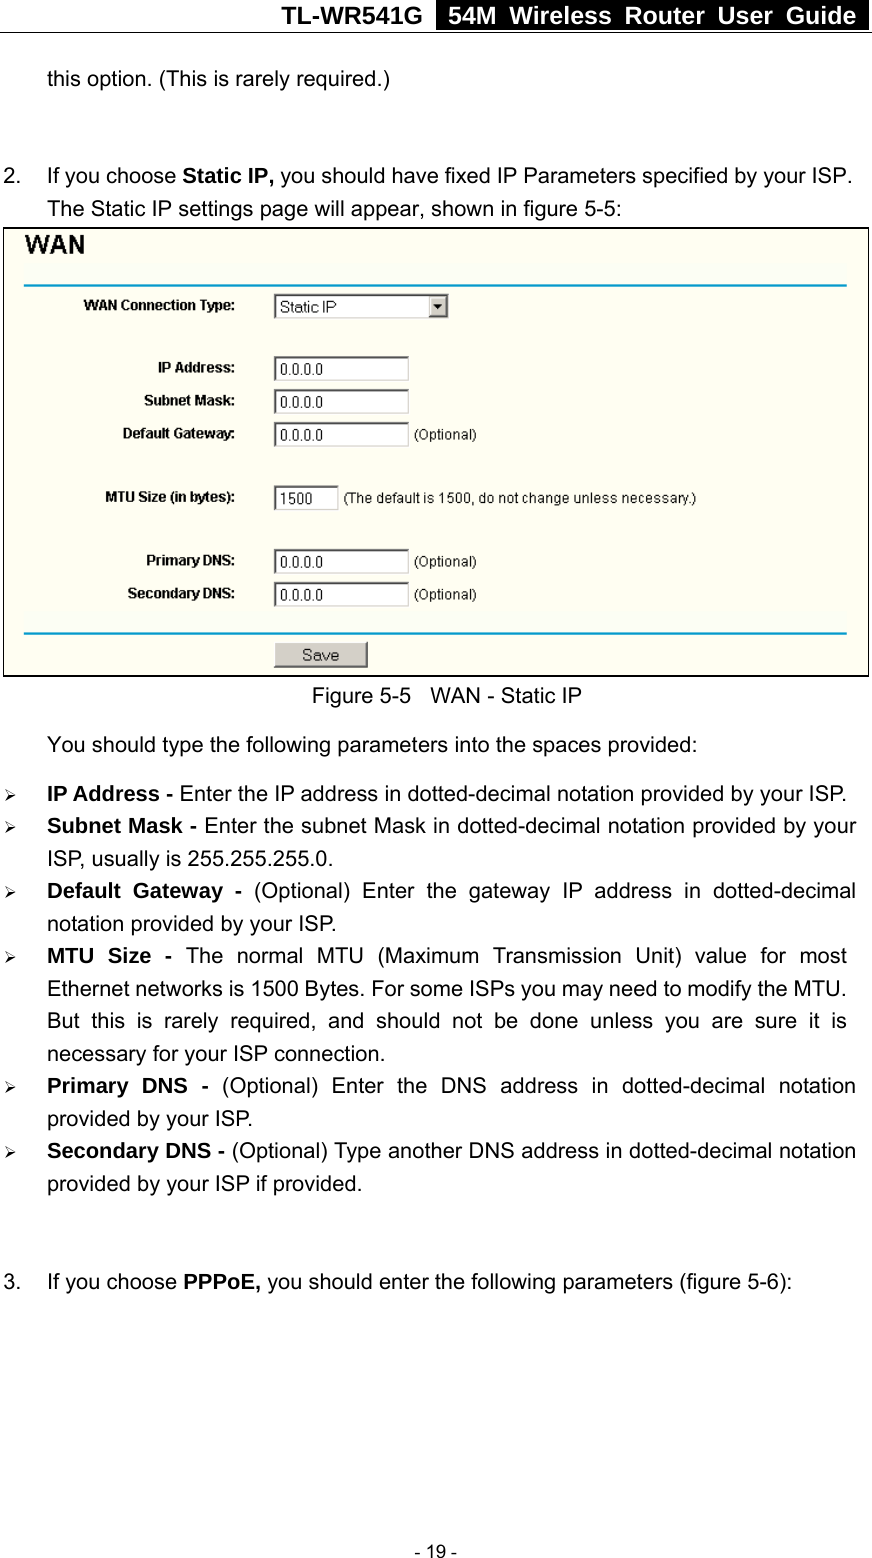 TL-WR541G   54M Wireless Router User Guide  this option. (This is rarely required.)  2.  If you choose Static IP, you should have fixed IP Parameters specified by your ISP. The Static IP settings page will appear, shown in figure 5-5:  Figure 5-5  WAN - Static IP You should type the following parameters into the spaces provided: ¾ IP Address - Enter the IP address in dotted-decimal notation provided by your ISP. ¾ Subnet Mask - Enter the subnet Mask in dotted-decimal notation provided by your ISP, usually is 255.255.255.0. ¾ Default Gateway - (Optional) Enter the gateway IP address in dotted-decimal notation provided by your ISP. ¾ MTU Size - The normal MTU (Maximum Transmission Unit) value for most Ethernet networks is 1500 Bytes. For some ISPs you may need to modify the MTU. But this is rarely required, and should not be done unless you are sure it is necessary for your ISP connection. ¾ Primary DNS - (Optional) Enter the DNS address in dotted-decimal notation provided by your ISP. ¾ Secondary DNS - (Optional) Type another DNS address in dotted-decimal notation provided by your ISP if provided.  3.  If you choose PPPoE, you should enter the following parameters (figure 5-6):    - 19 - 